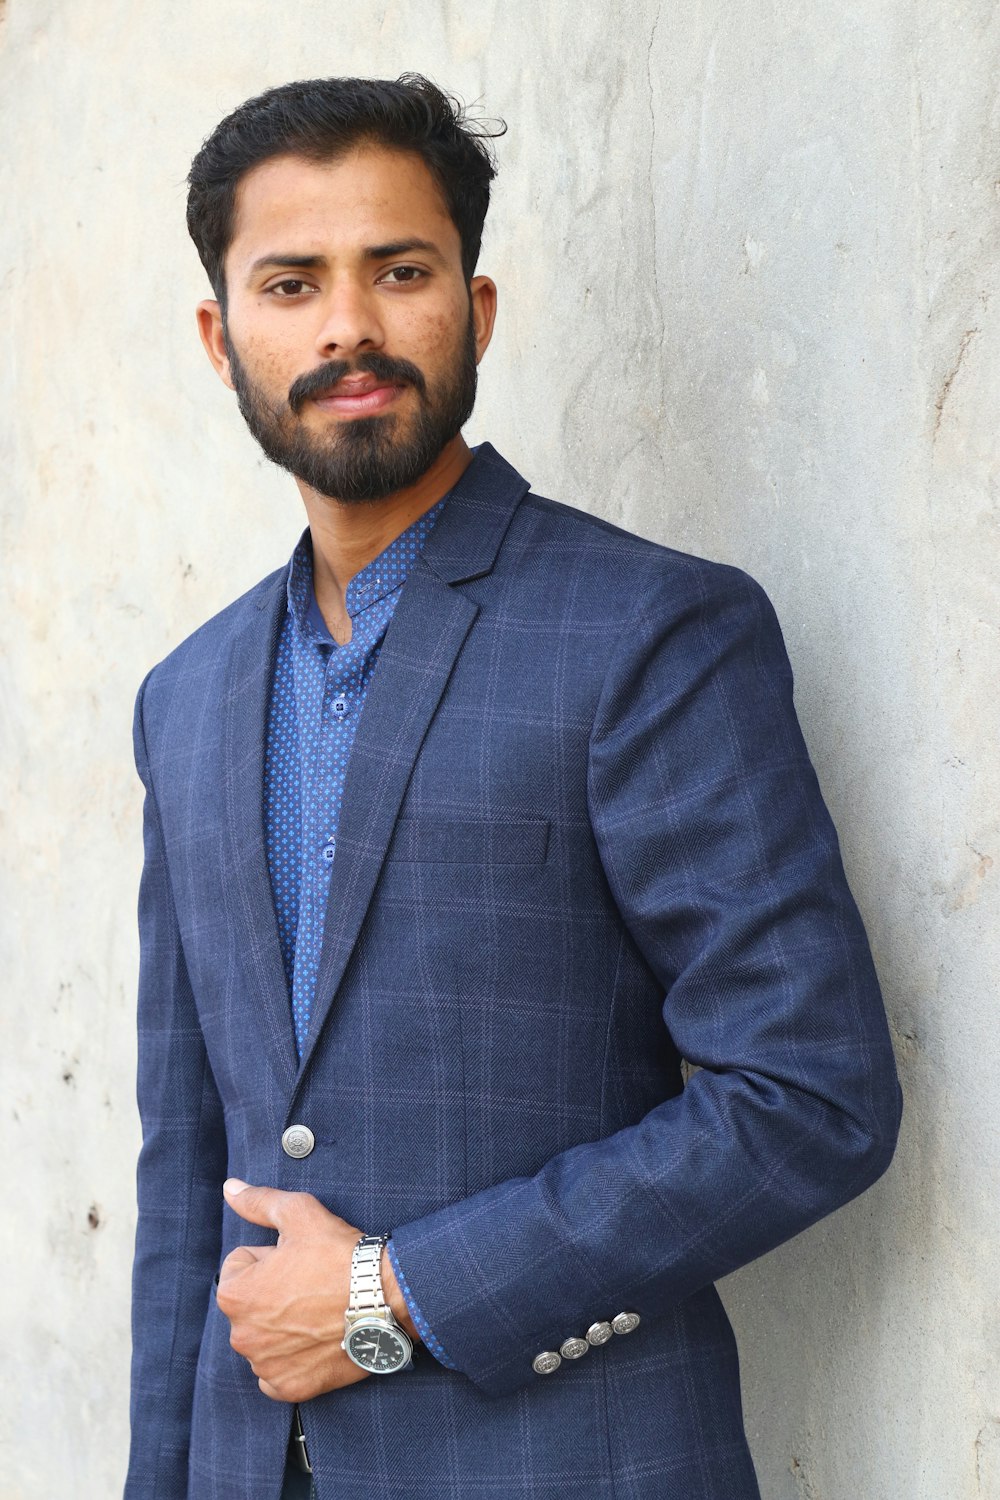 a man with a beard wearing a blue suit